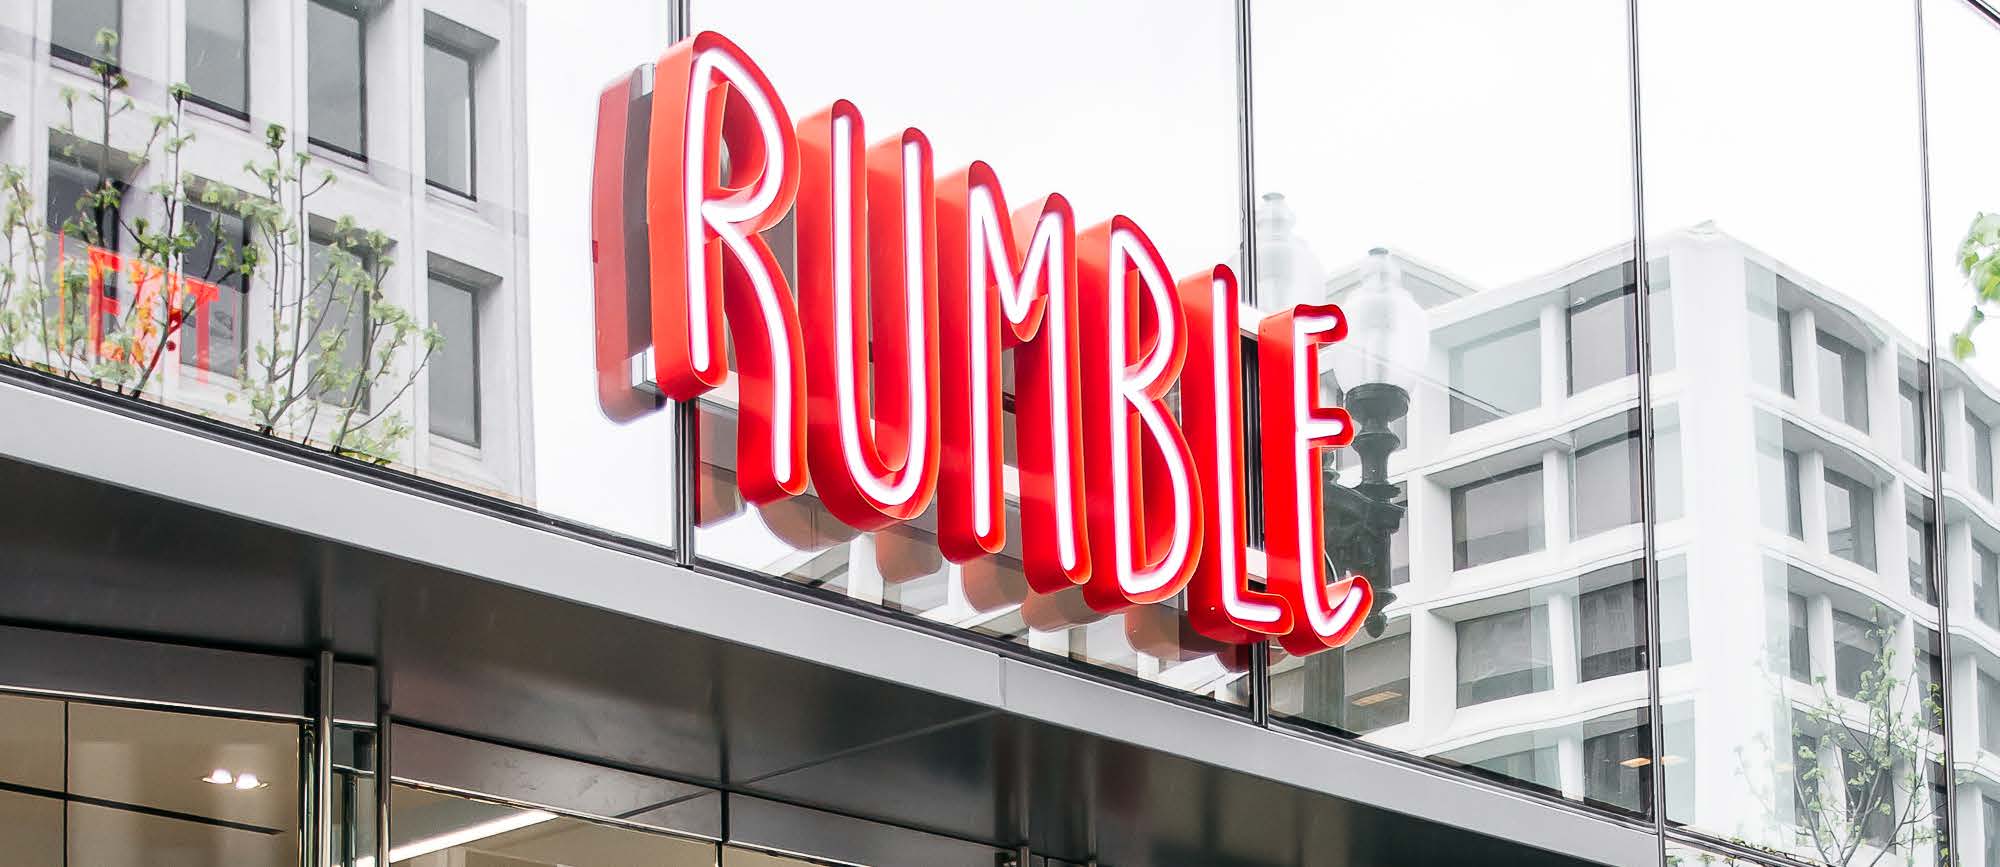 Rumble sign